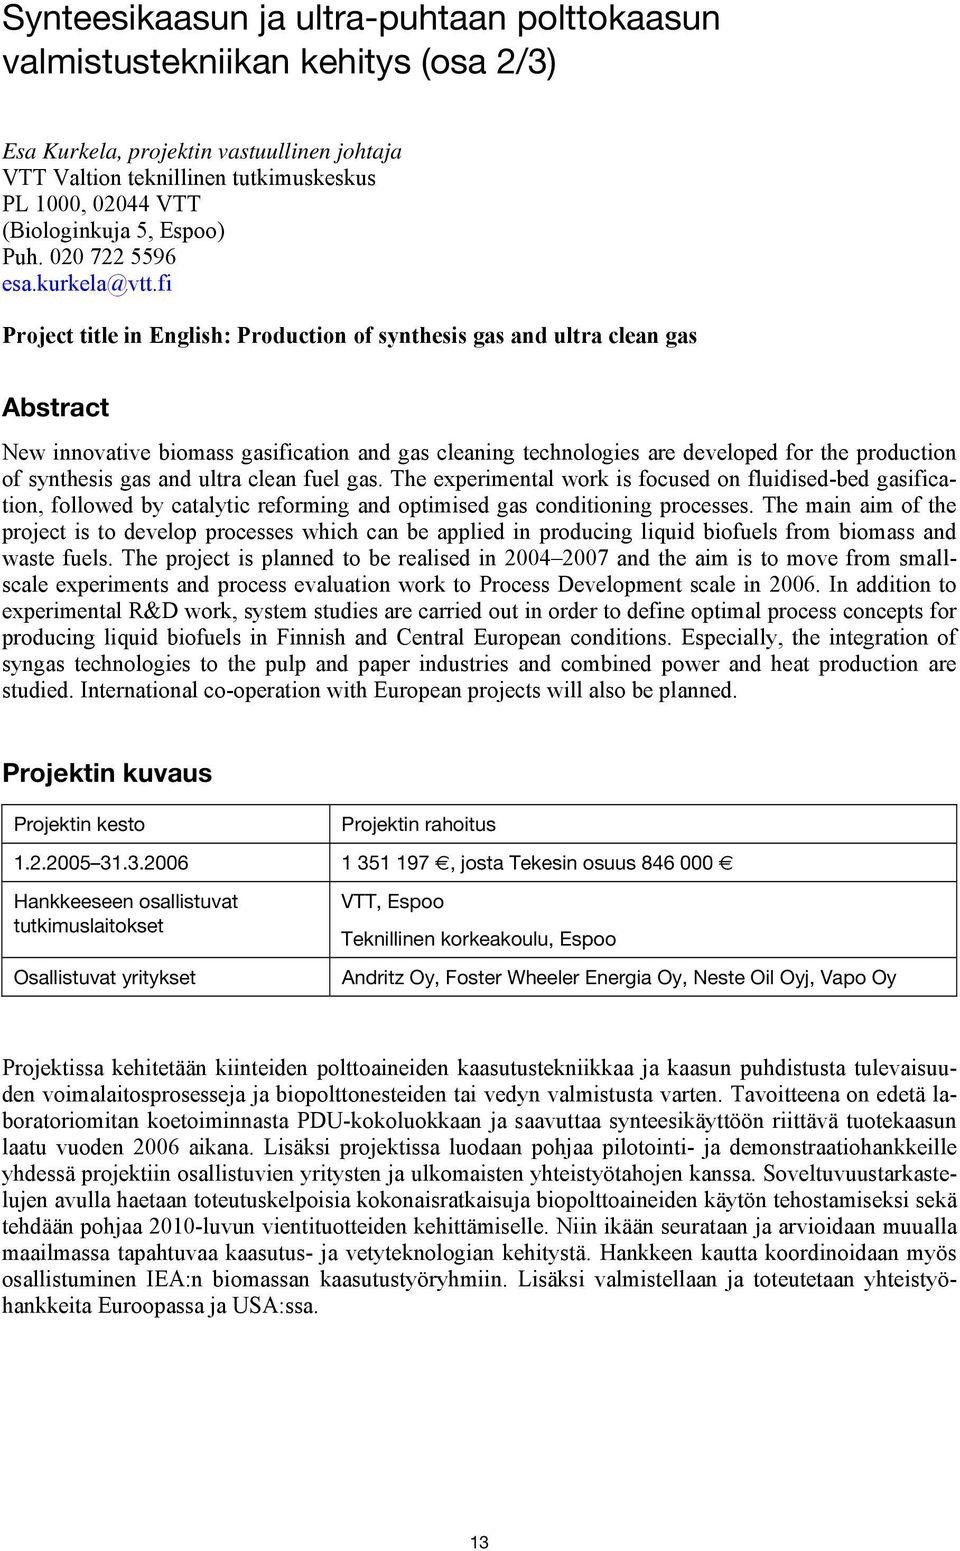 fi Project title in English: Production of synthesis gas and ultra clean gas Abstract New innovative biomass gasification and gas cleaning technologies are developed for the production of synthesis